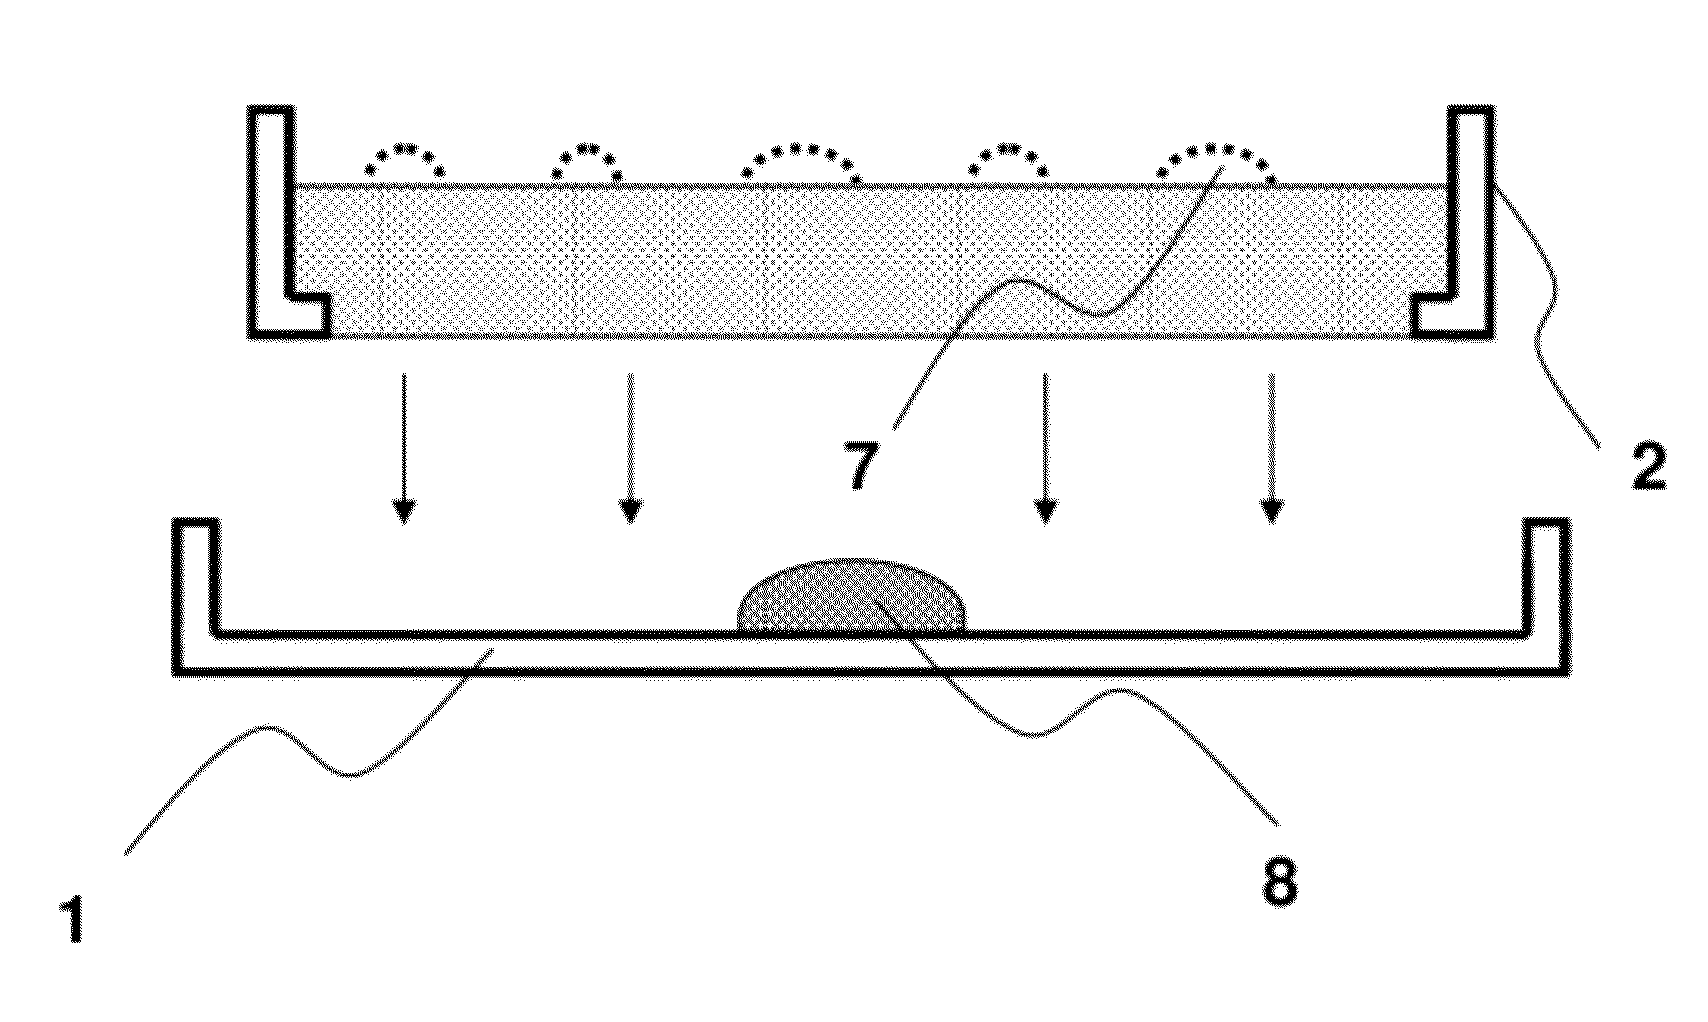 Method and apparatus for rapidly analyzing microorganisms using petri plates